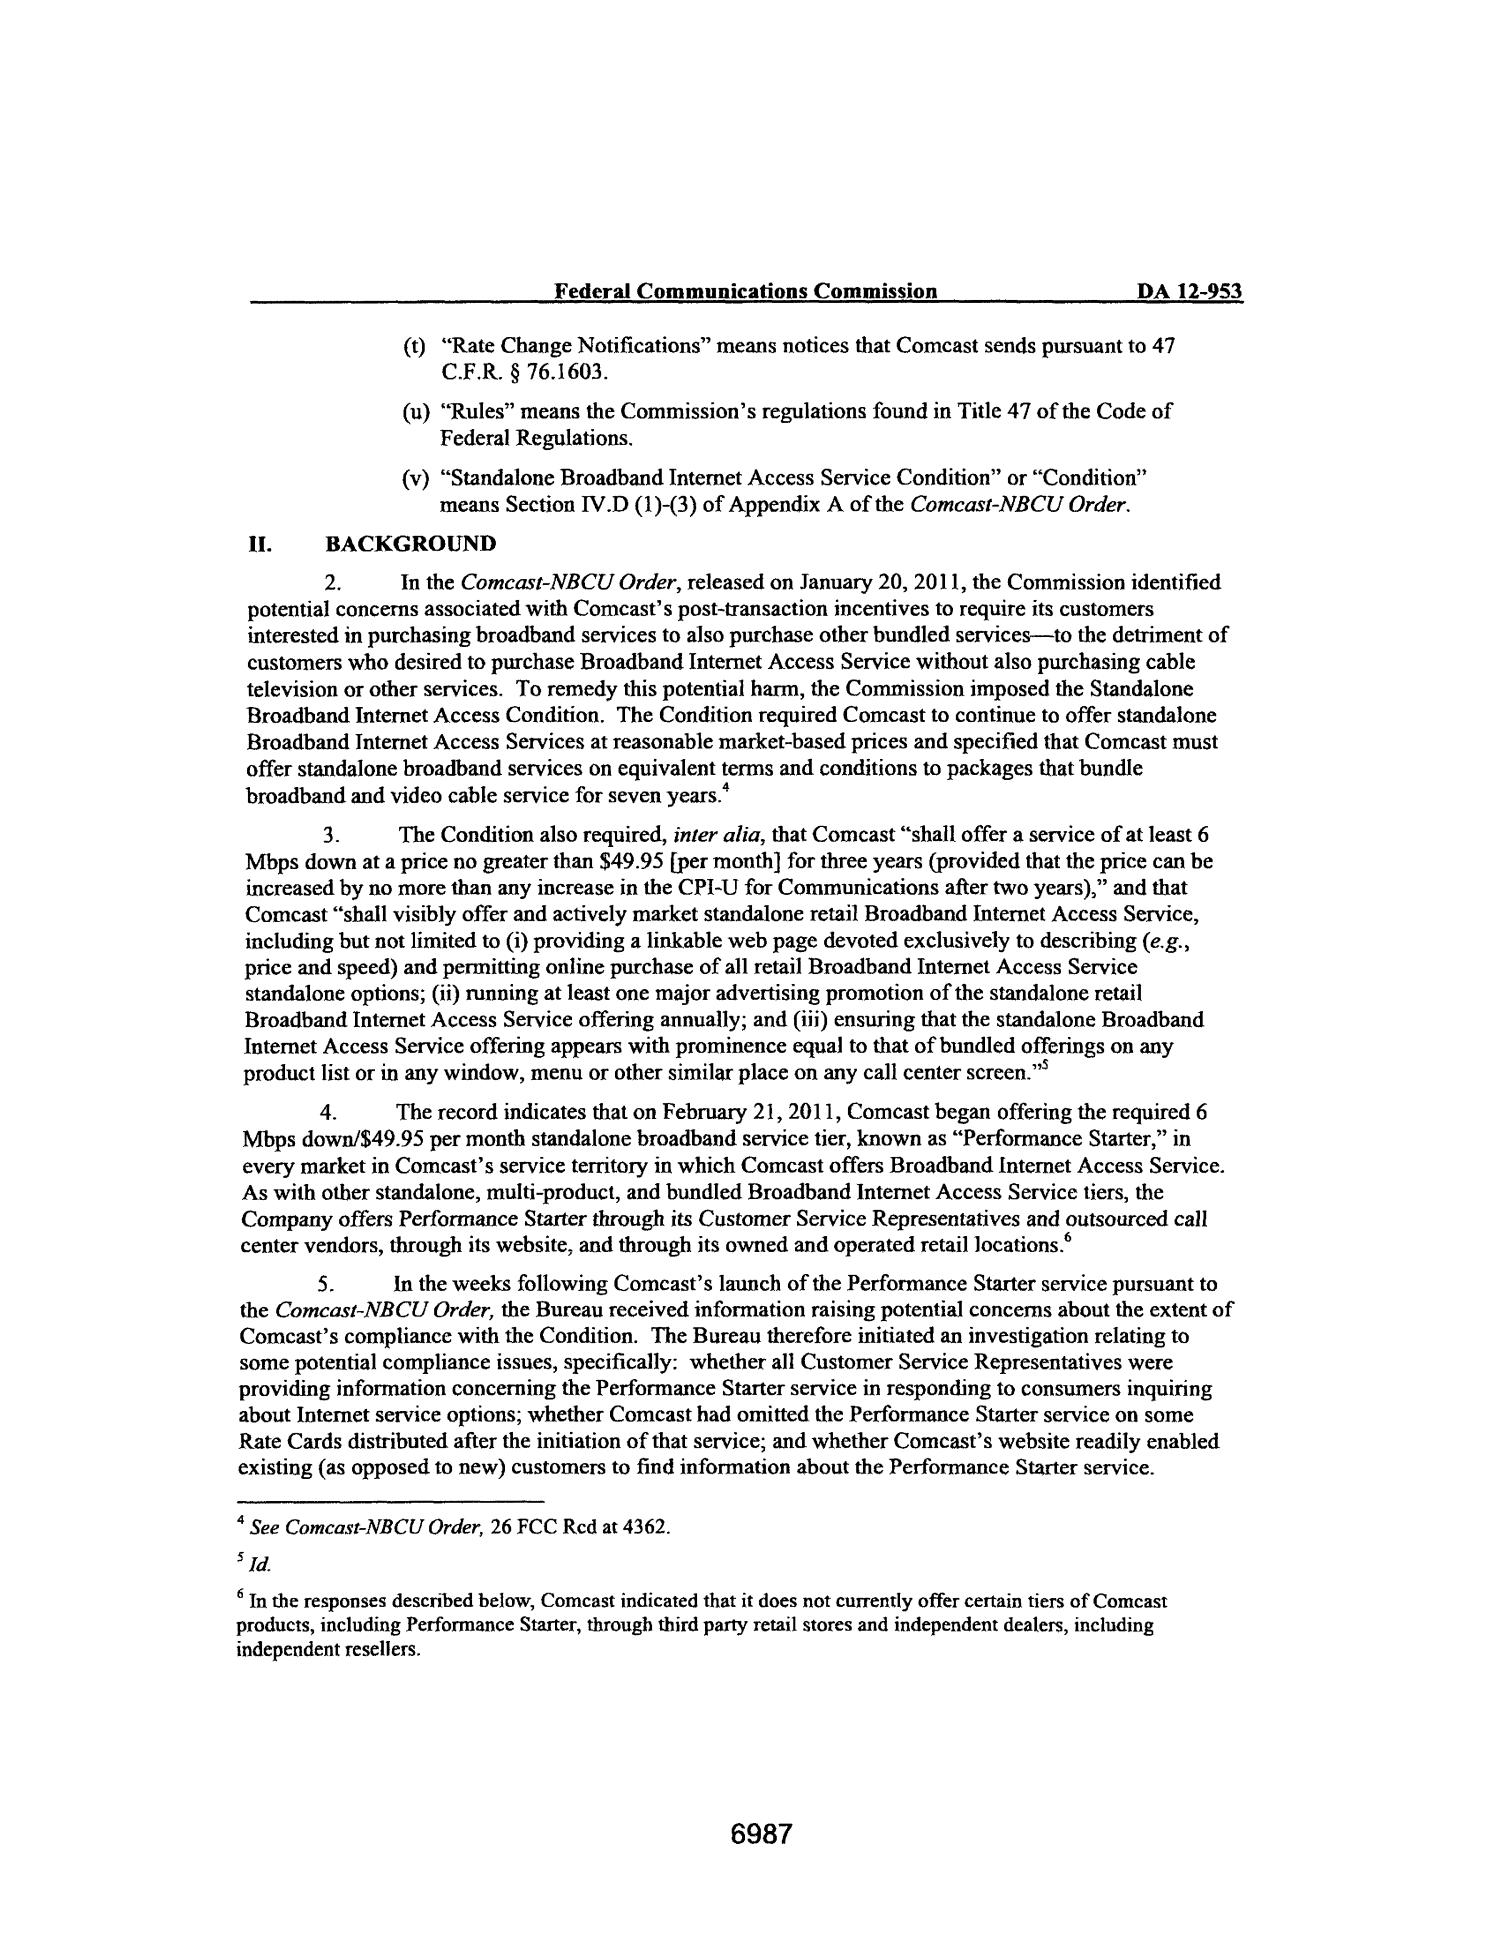 FCC Record, Volume 27, No. 9, Pages 6955 to 7935, June 18 - July 12, 2012
                                                
                                                    6987
                                                